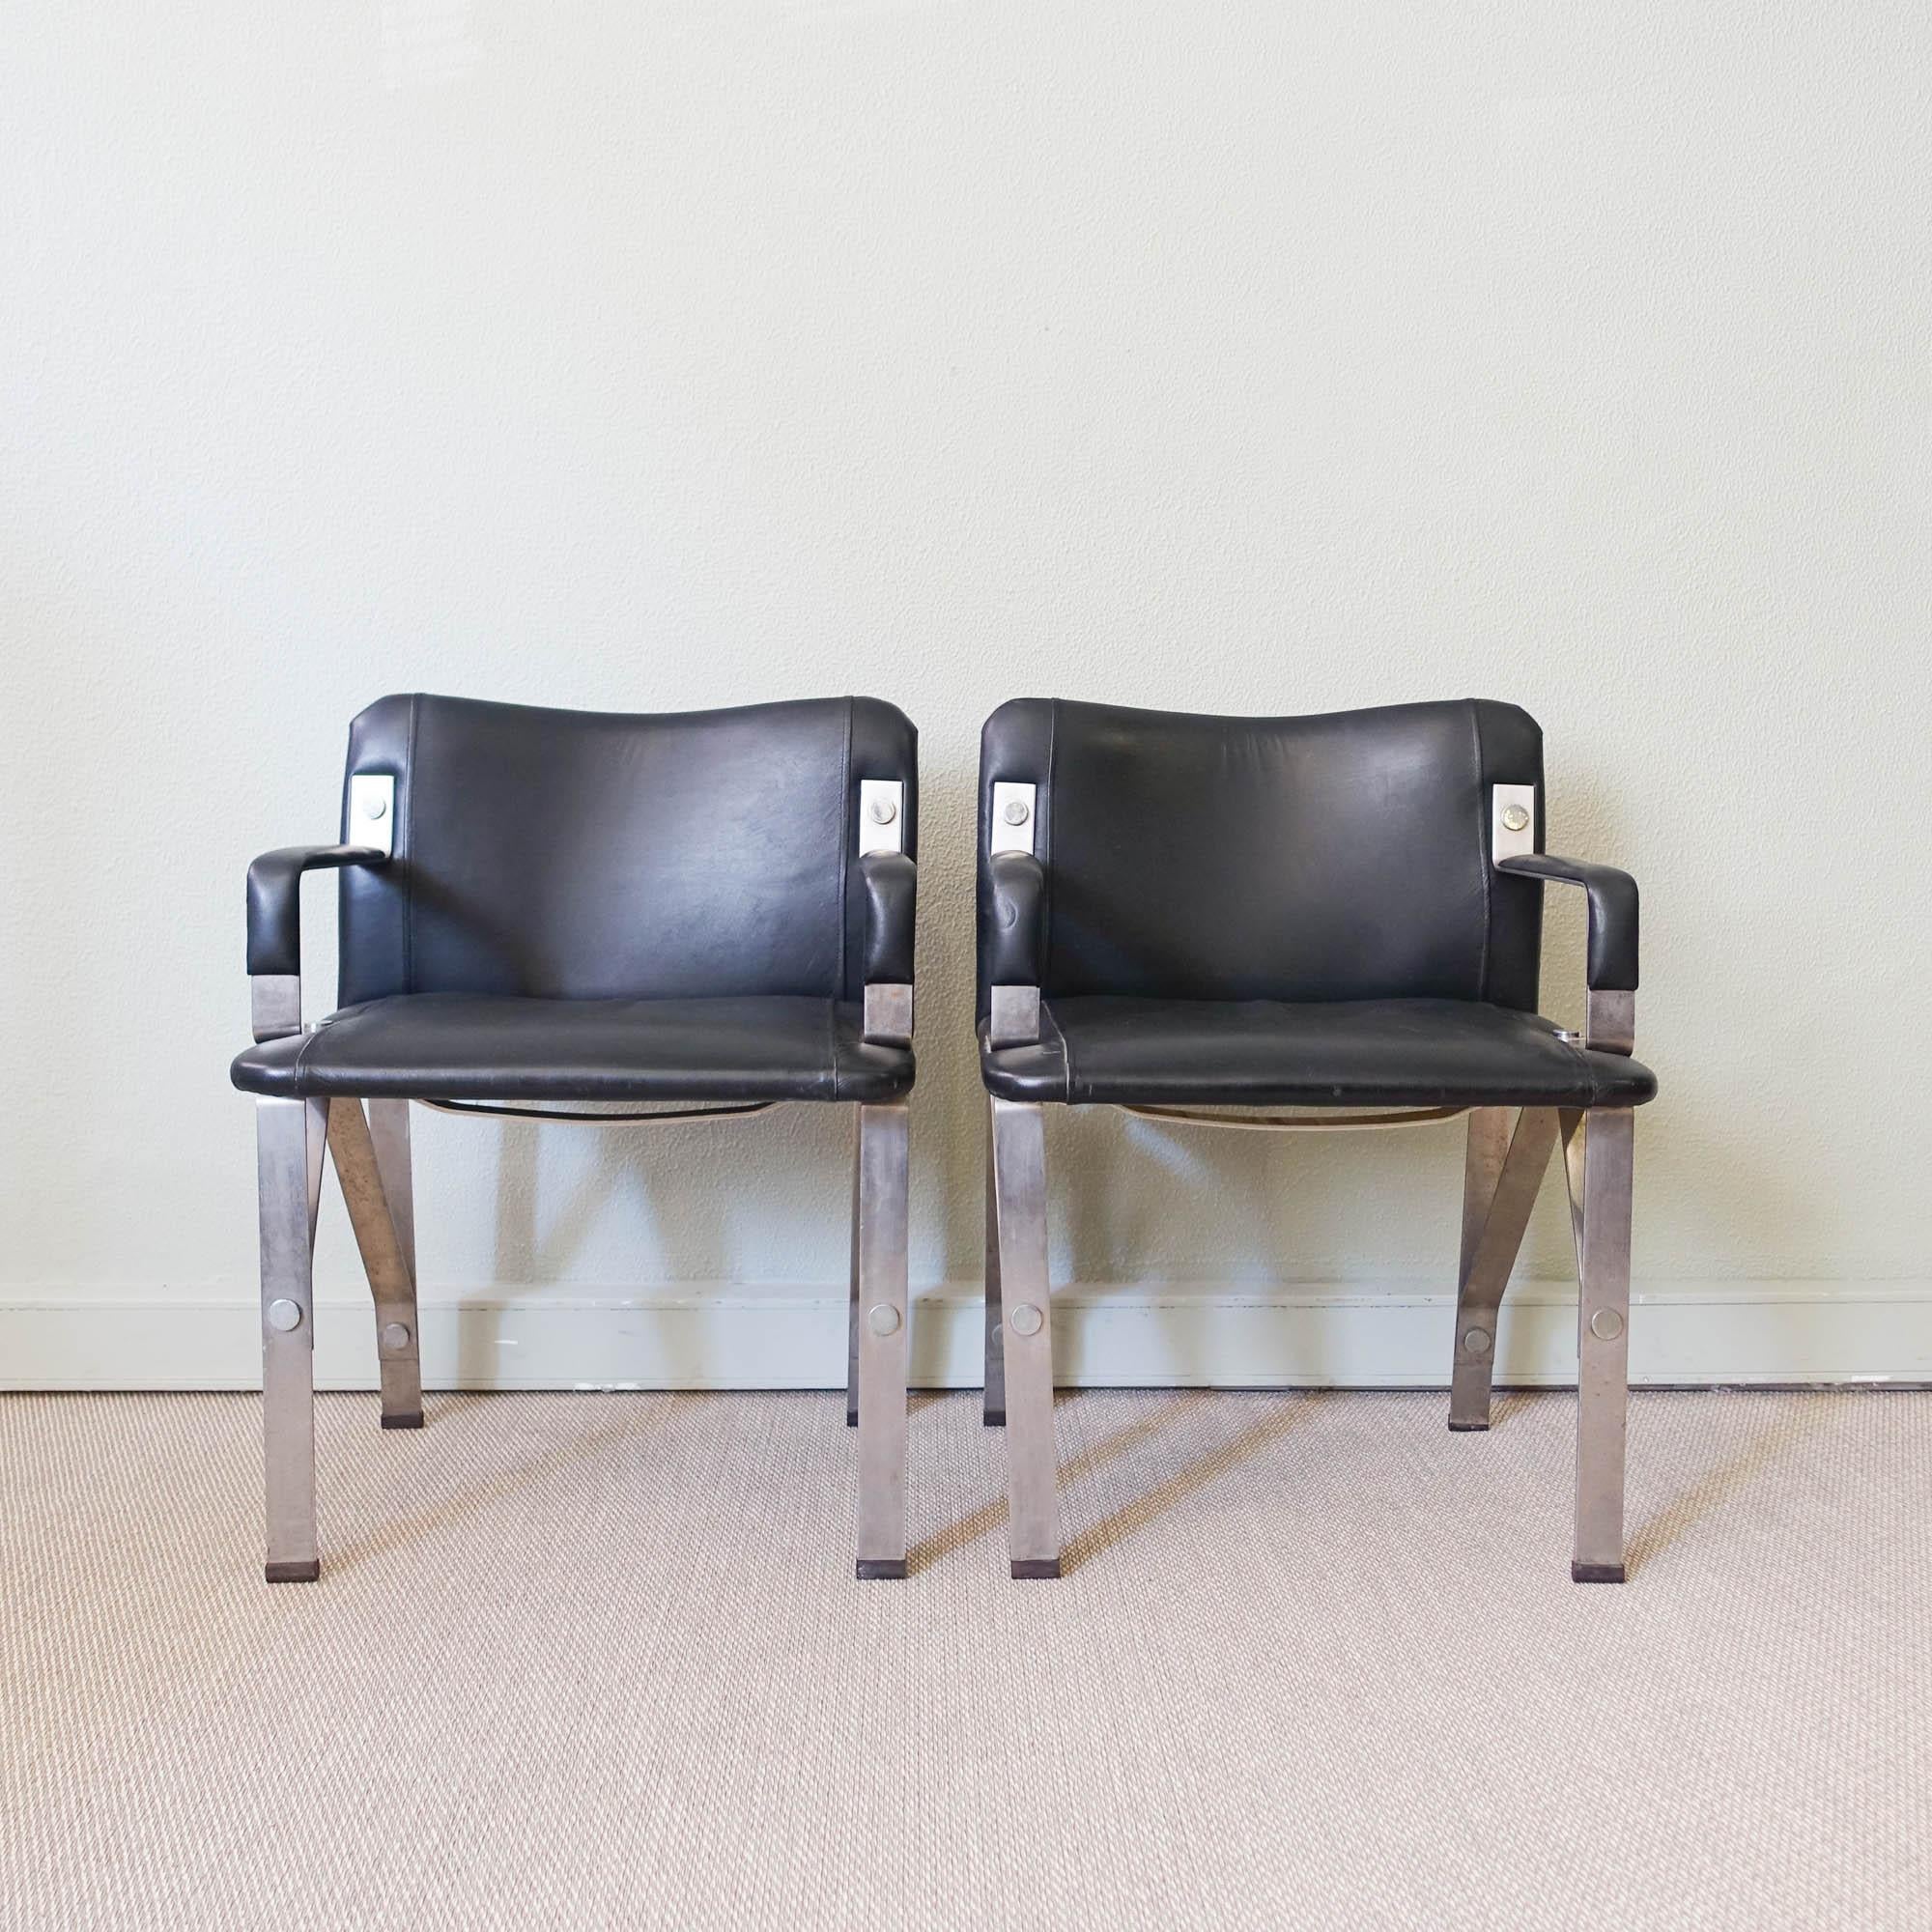 This pair of armchairs, was designed by Gilberto Lopes, in Portugal, during the 1970's. It is a brutalist style, featuring an heavy metal structure with black leather upholstery. This pair is in original and good vintage condition.